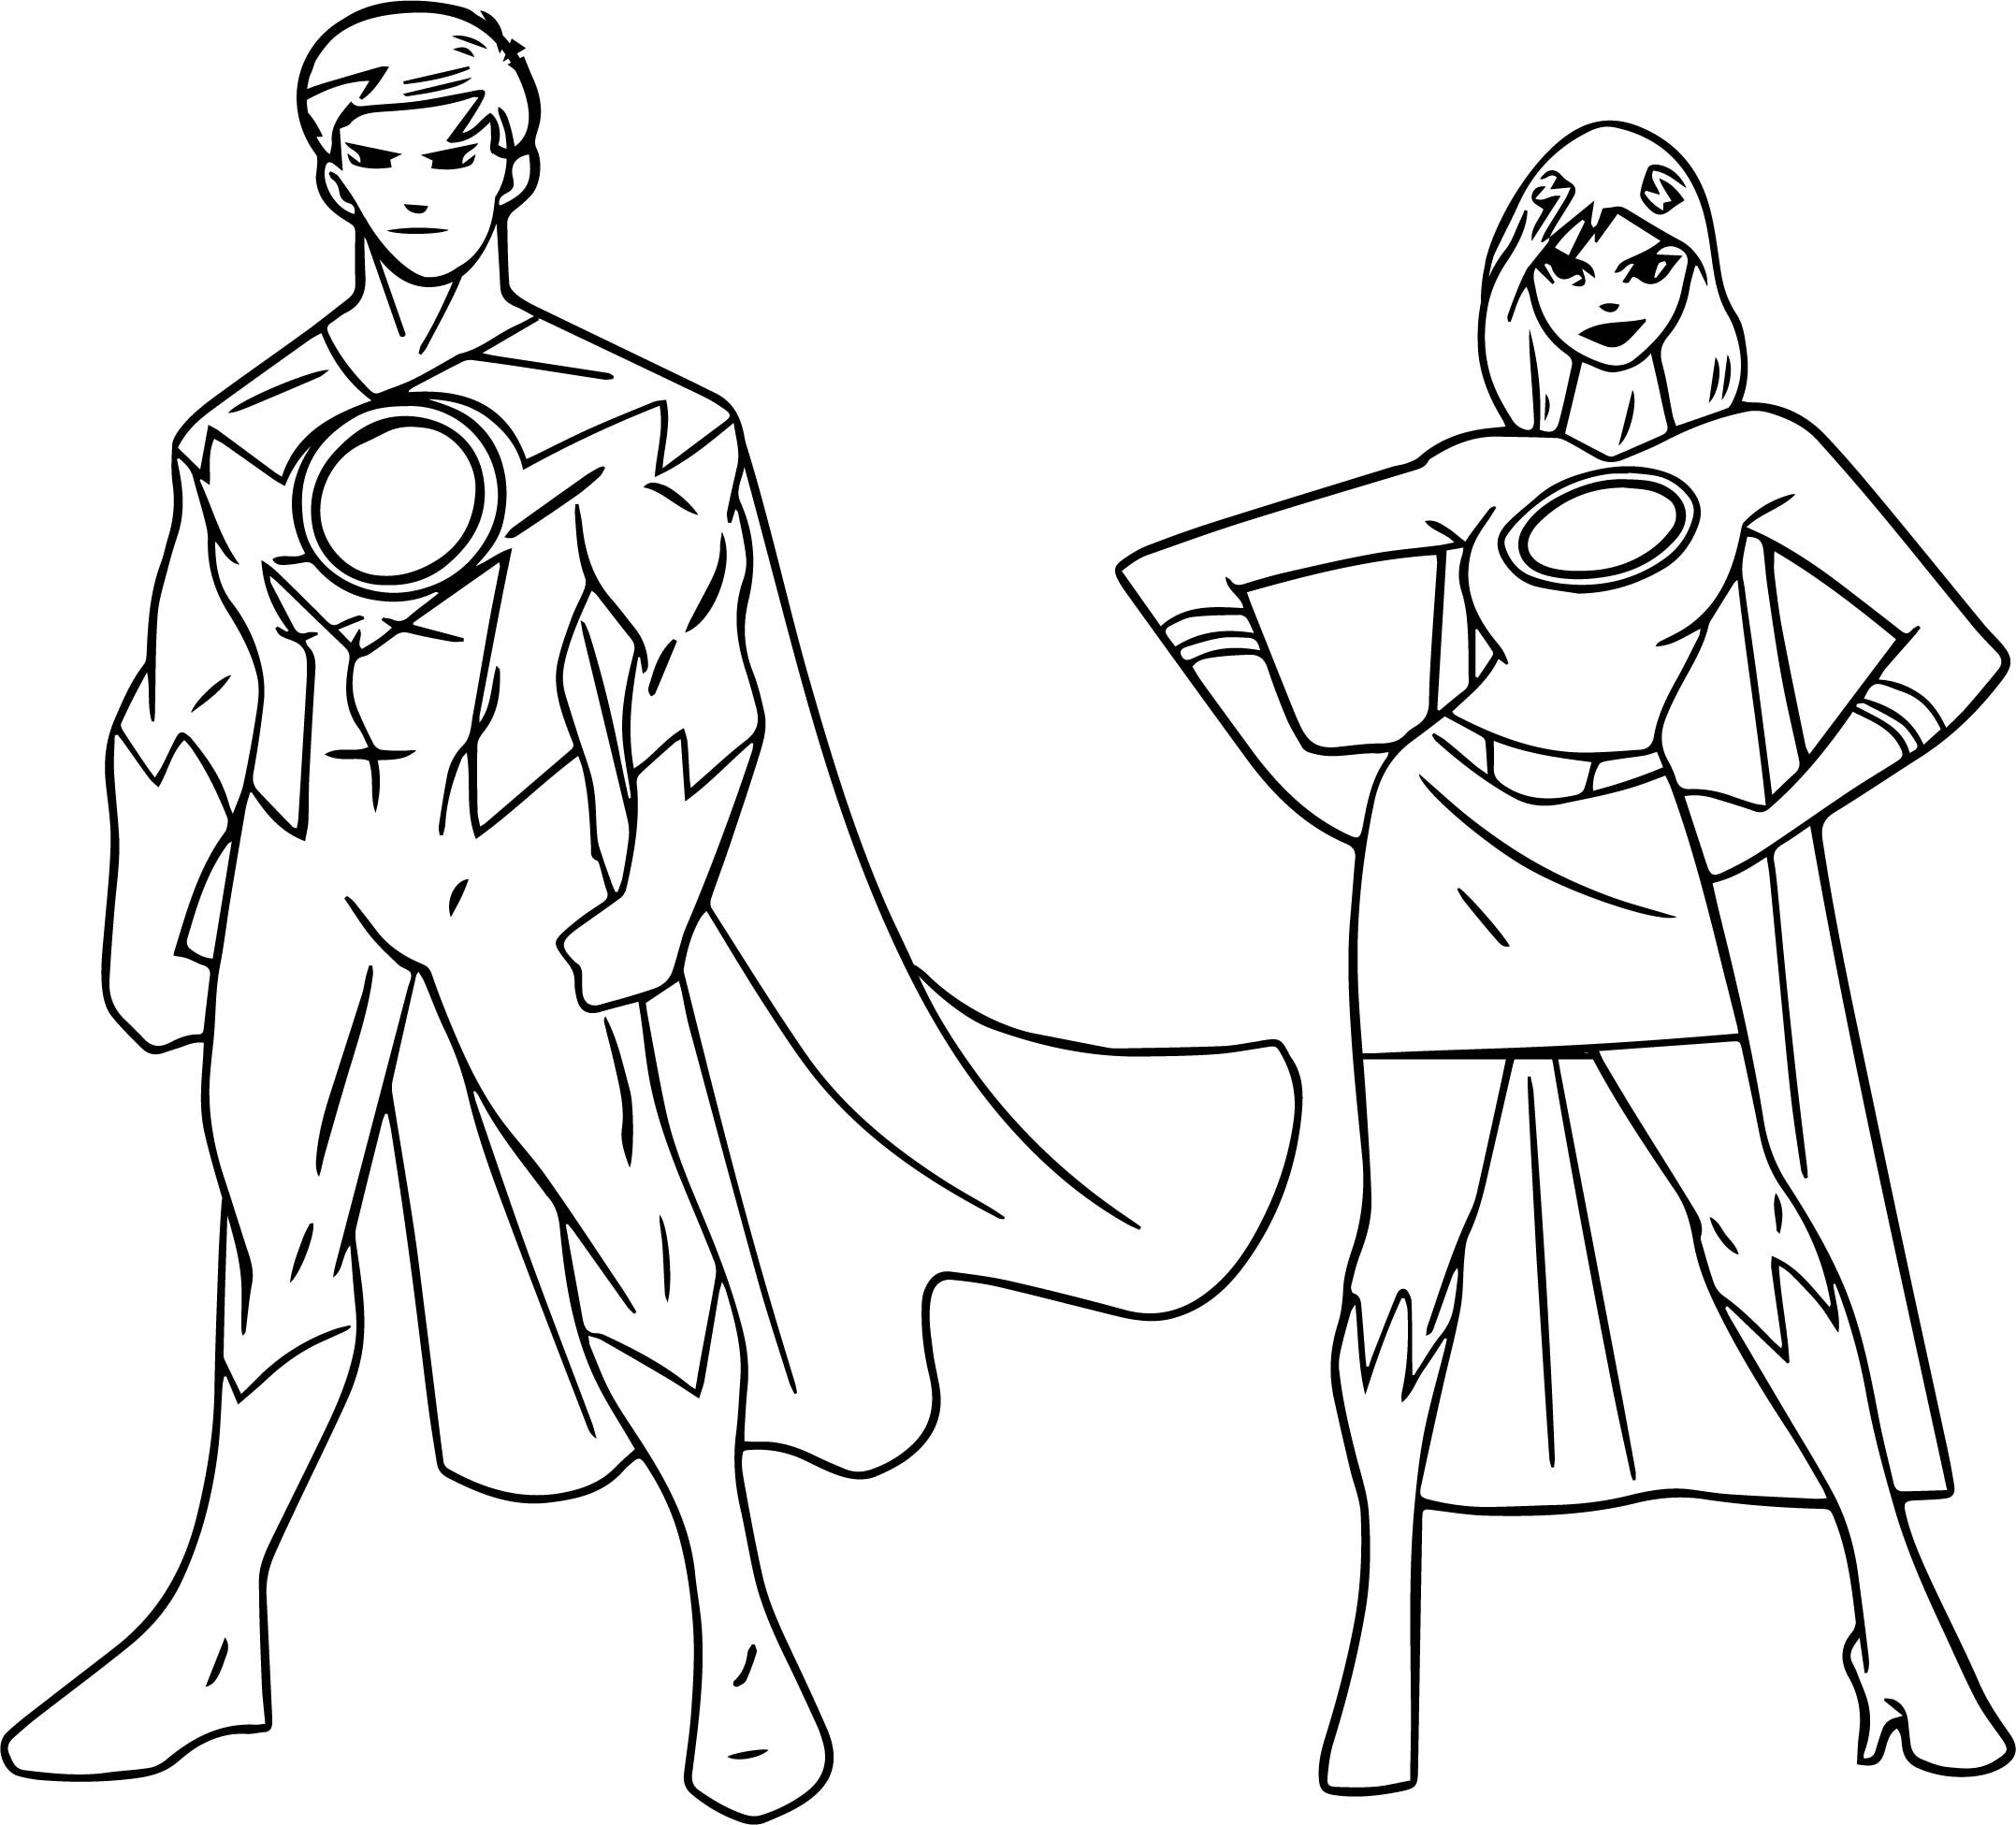 Dc Superhero Boys Coloring Pages
 Powered Superheroes Super Hero Girl Boy Coloring Page